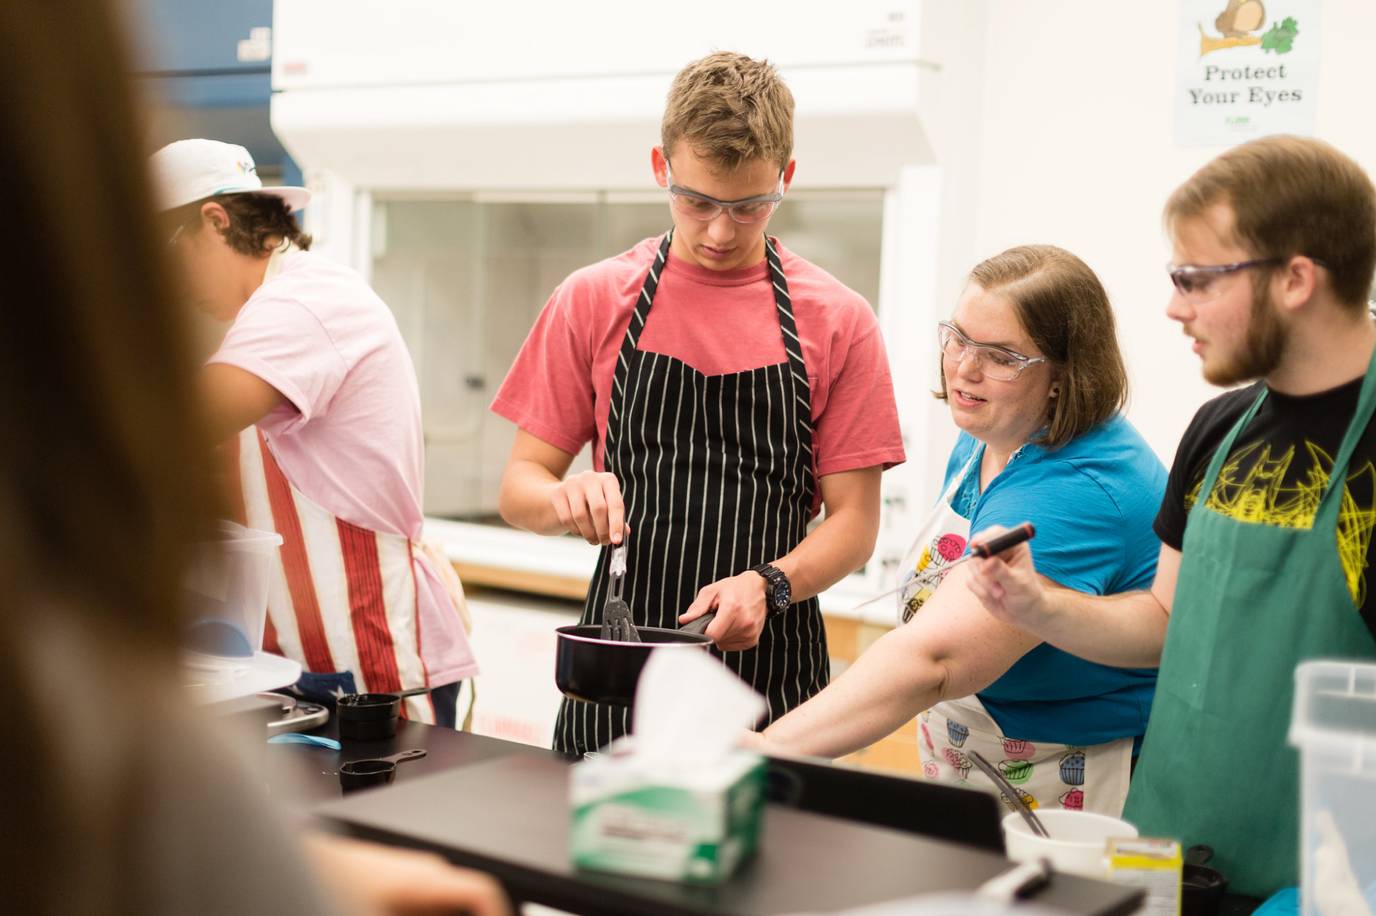 Students prepare gelatin during a chemistry experiment.